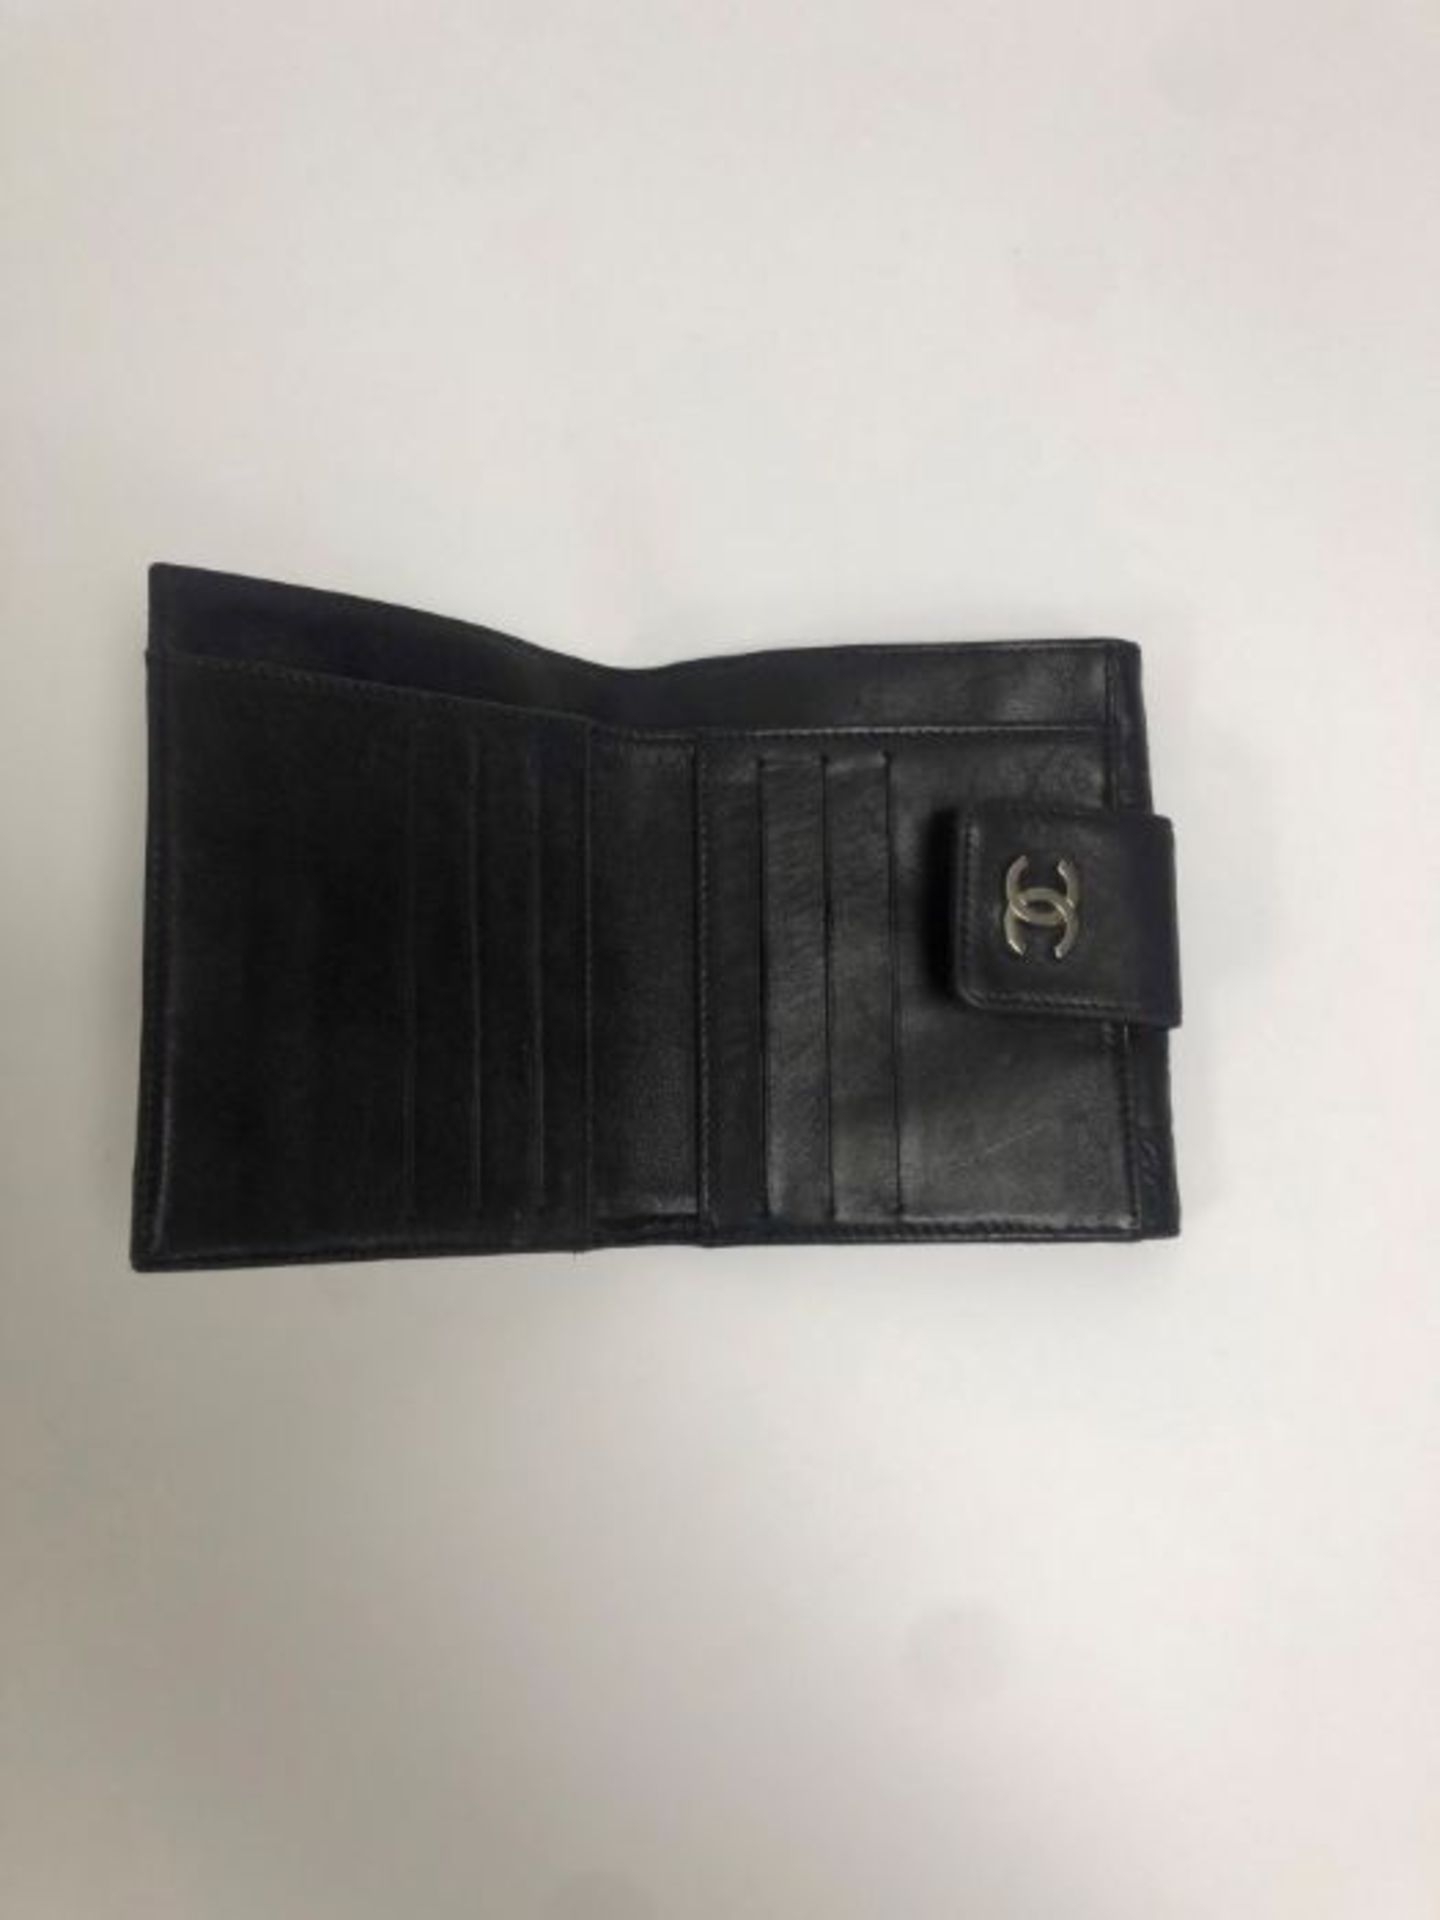 Chanel Black Leather Purse, Boxed, Some signs of use - Image 3 of 4